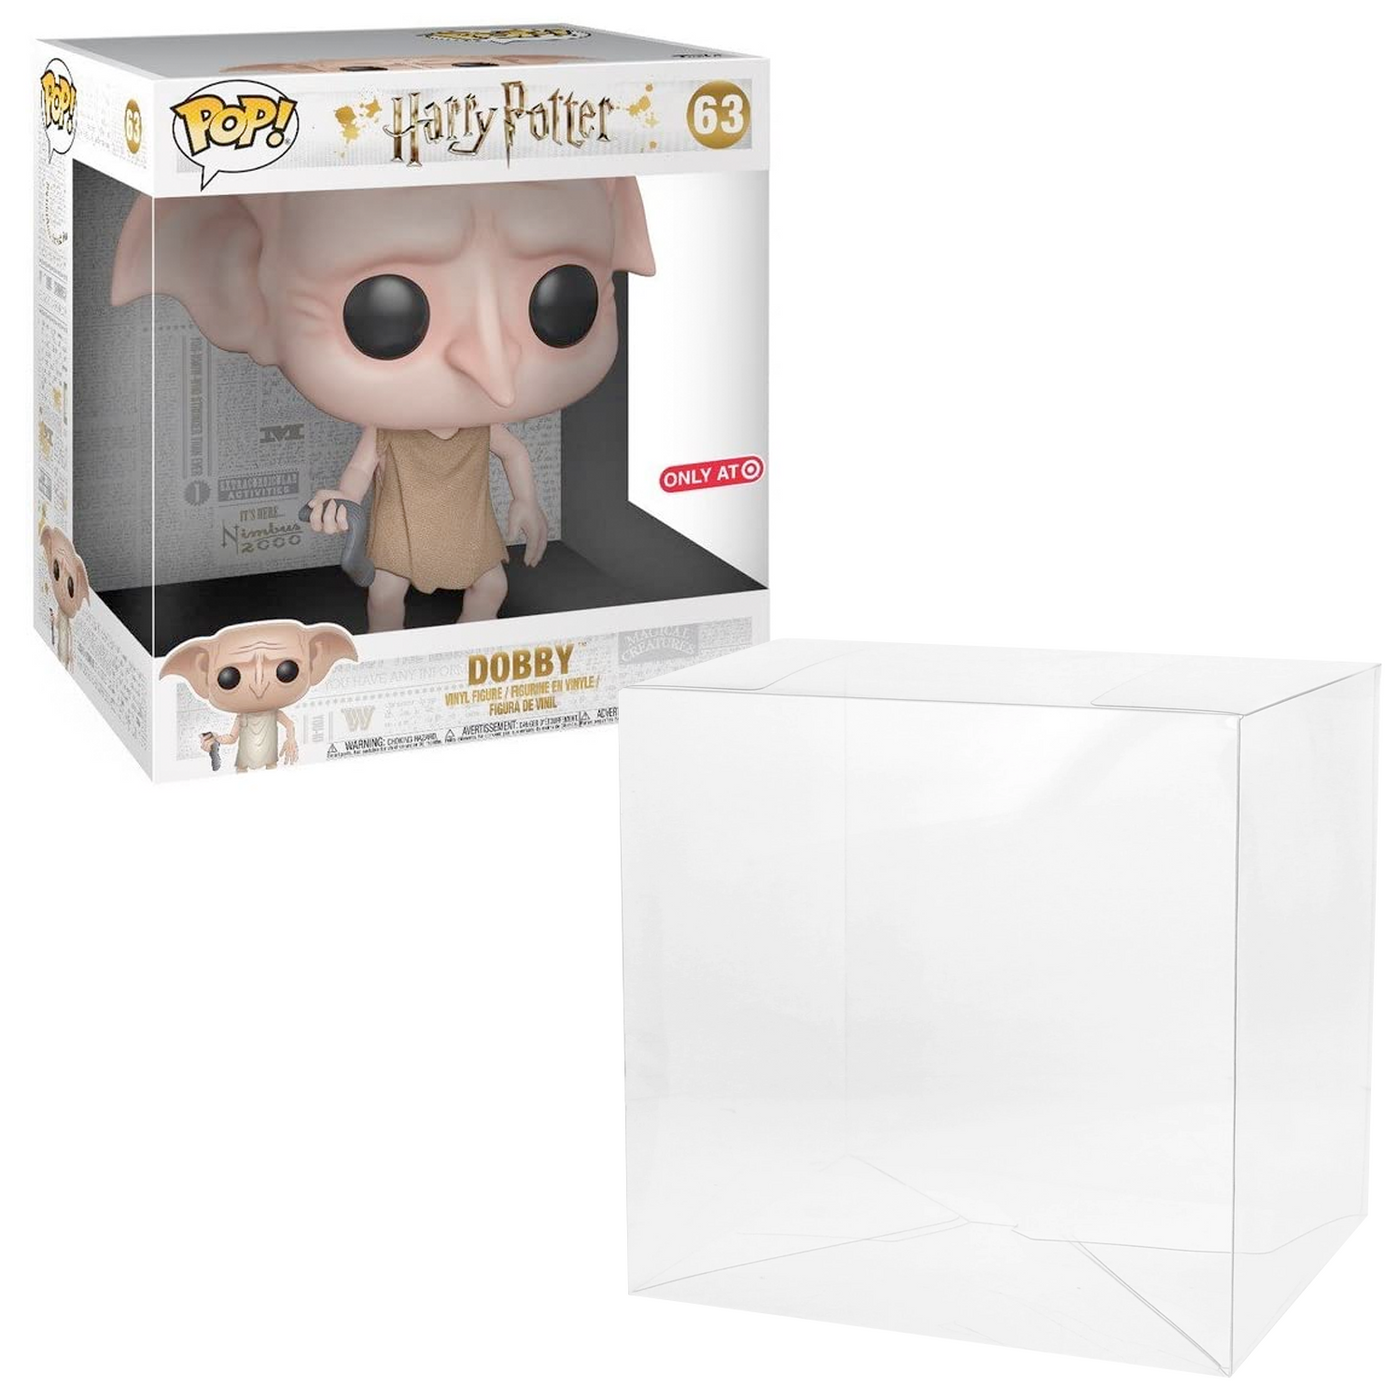 dobby wide 10 inch best funko pop protectors thick strong uv scratch flat top stack vinyl display geek plastic shield vaulted eco armor fits collect protect display case kollector protector